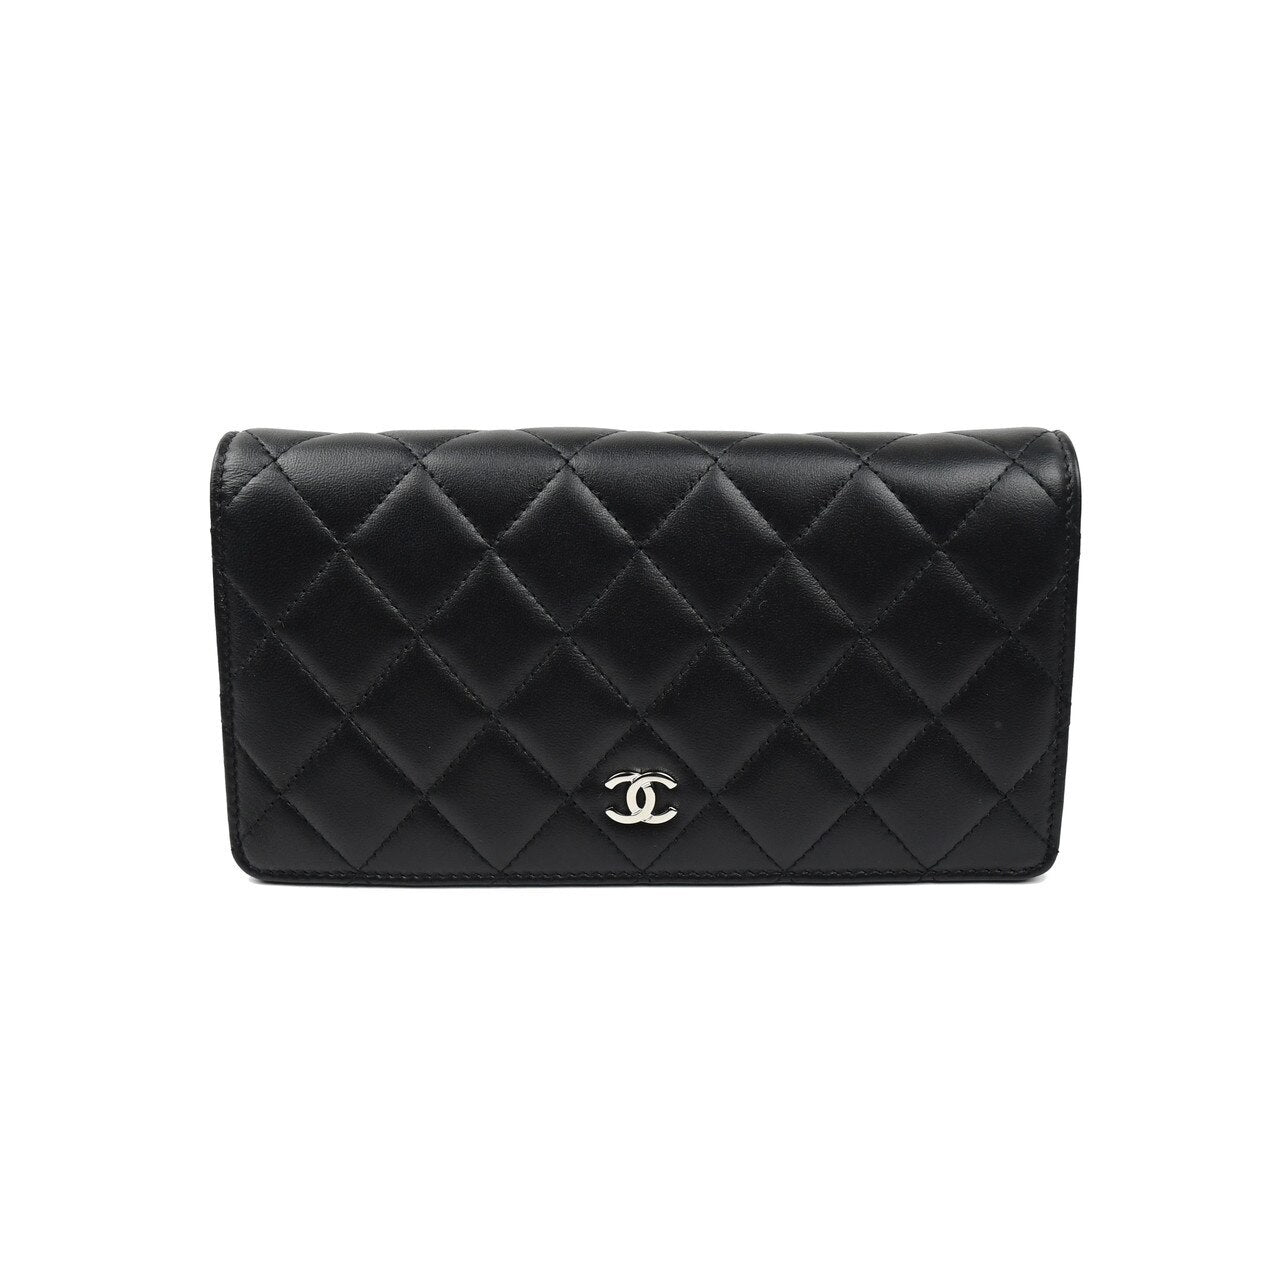 Chanel Card Holder Wallet - Cynthia's Attic Direct - Antiques and  Collectibles